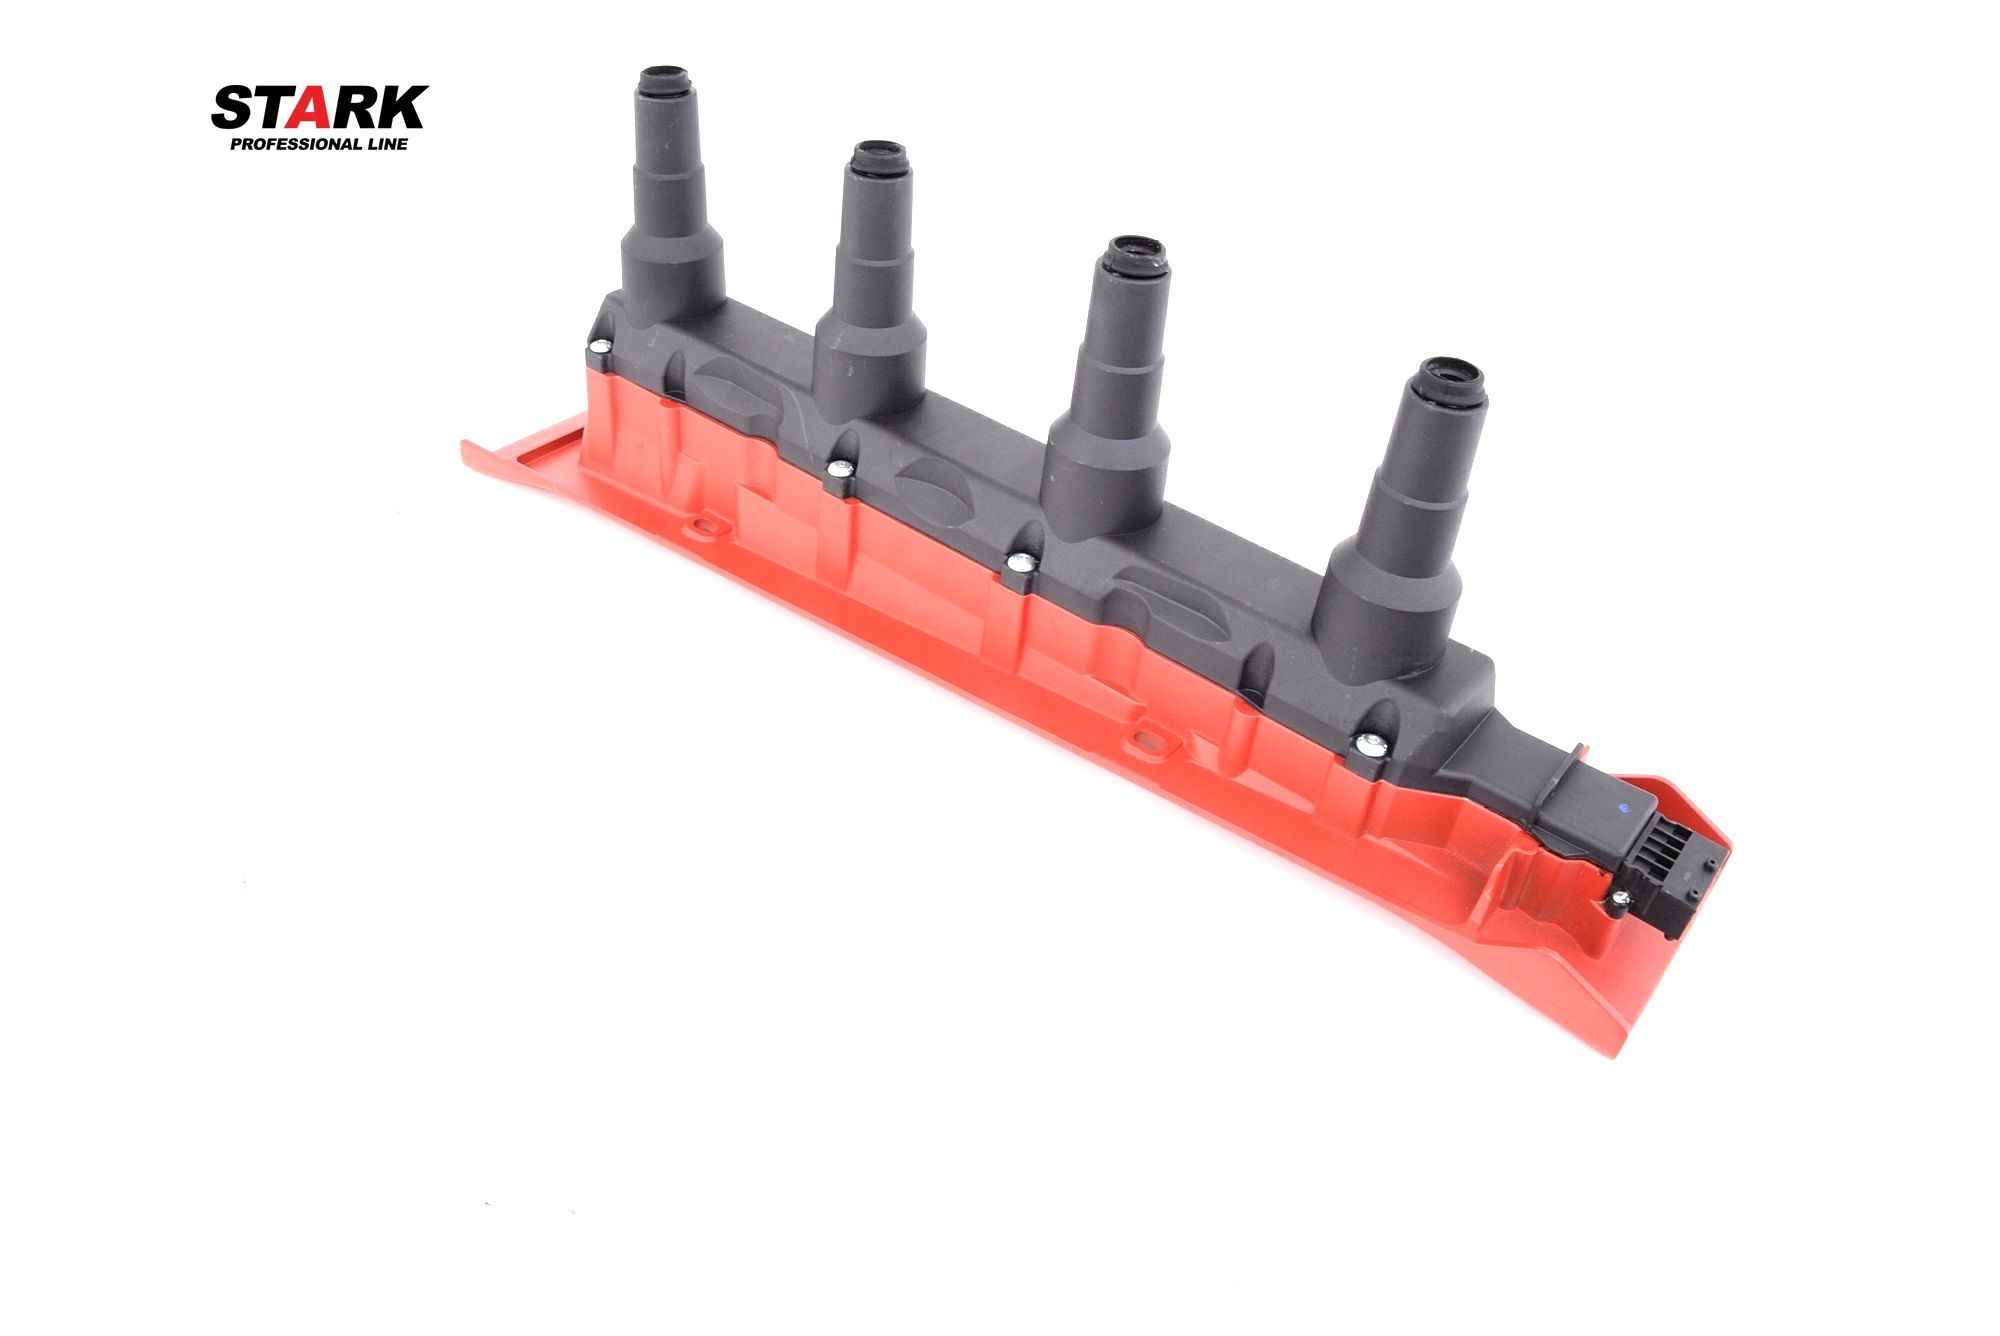 STARK SKCO-0070106 Ignition coil red, Number of connectors: 10, Ignition Coil Strips, Connector Type SAE, incl. spark plug connector